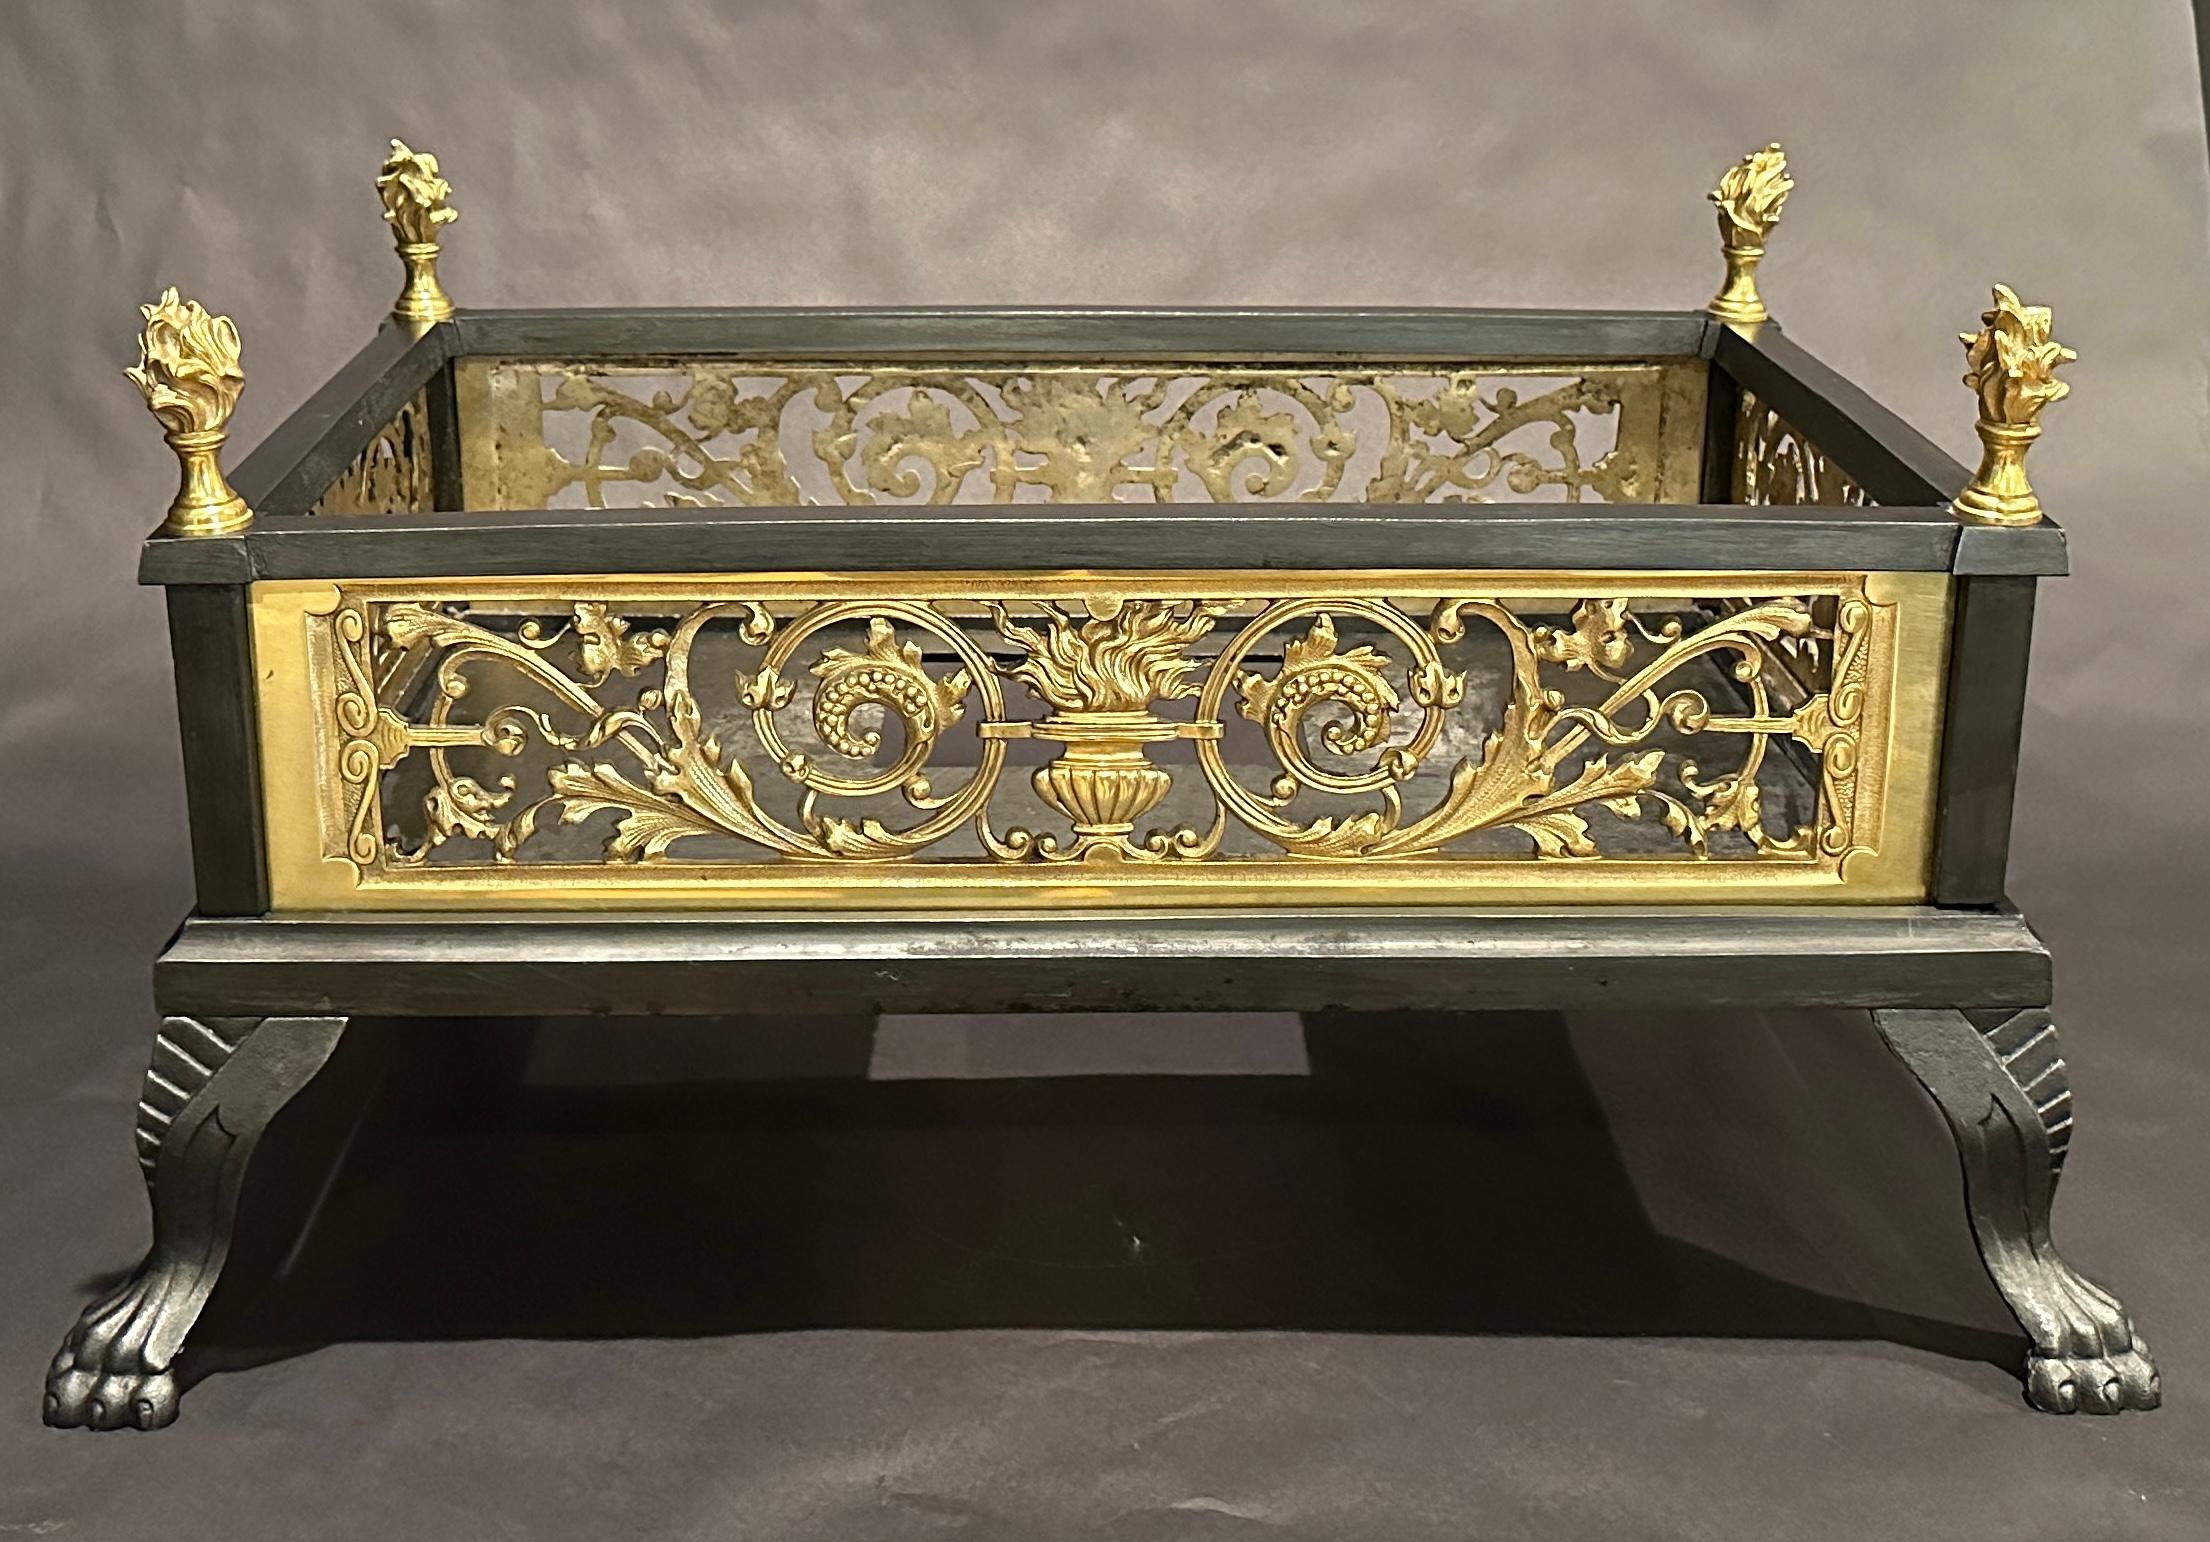 19th century highly decorative gilt bronze and iron box form fireplace grate insert. In the Louis XVI style with urn and flame center flanked by scrolling florets and flame form finials at top of each corner. Removable bottom insert.